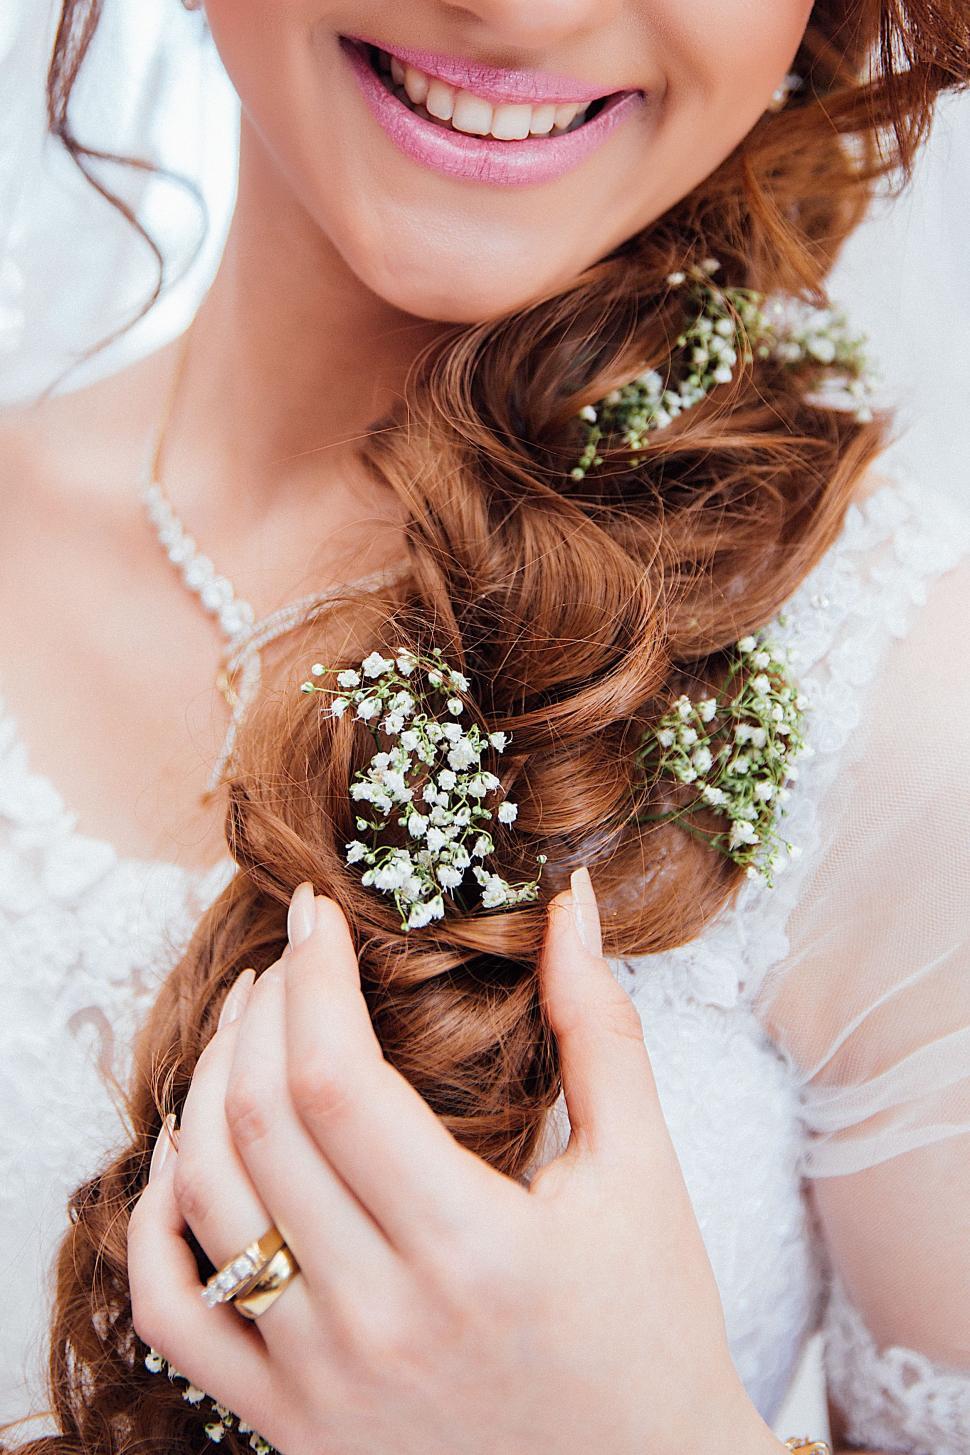 Free Image of Woman Wearing Wedding Dress With Flowers in Hair 